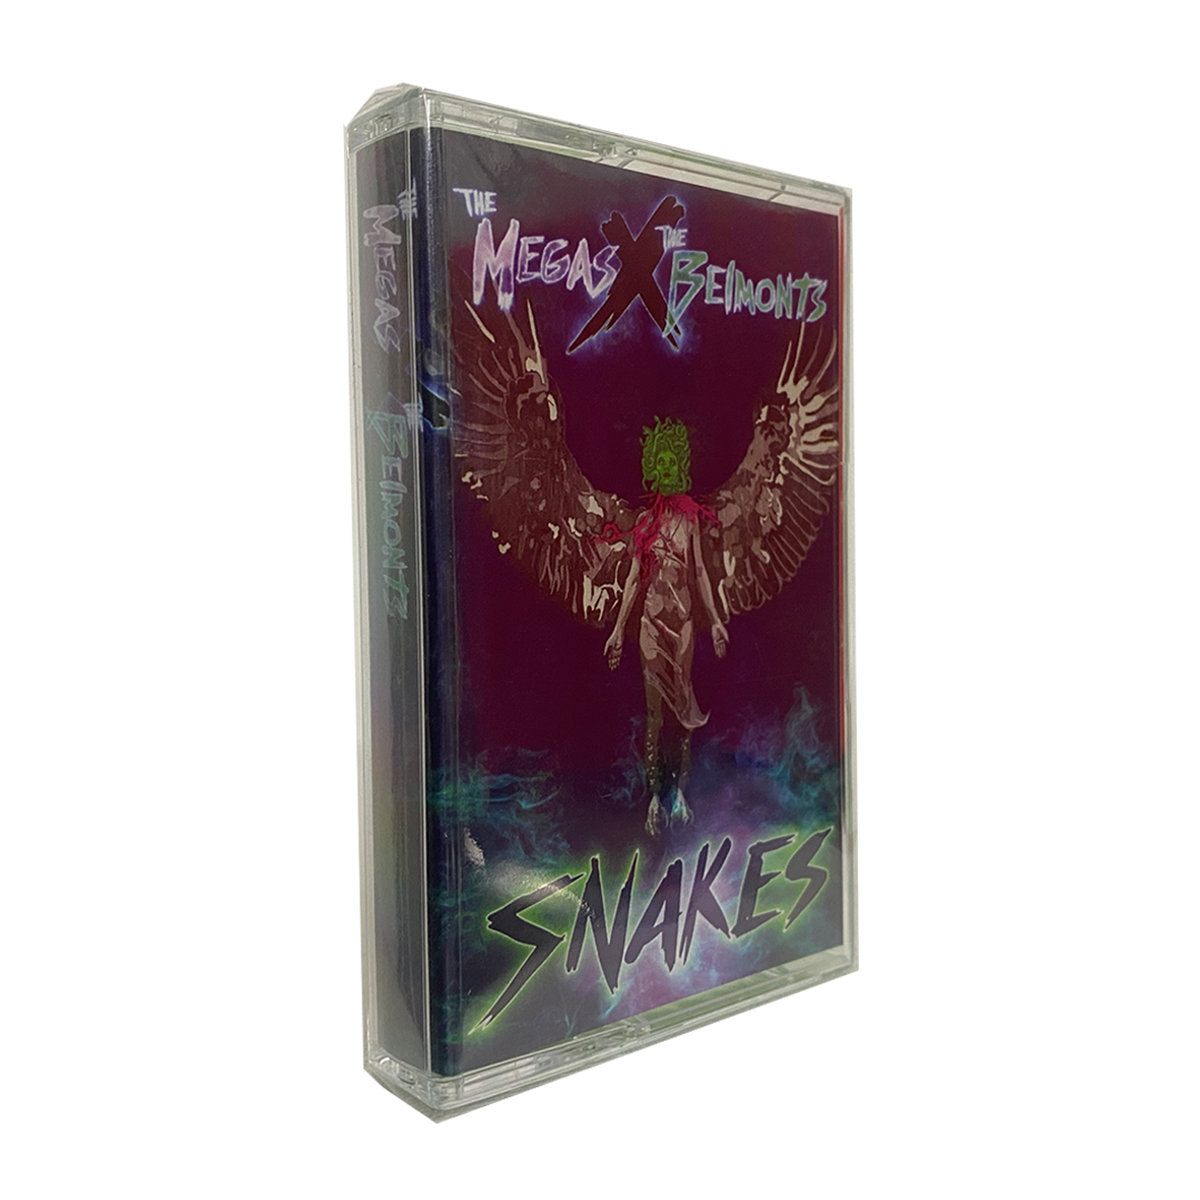 Snakes - Limited Edition Cassette